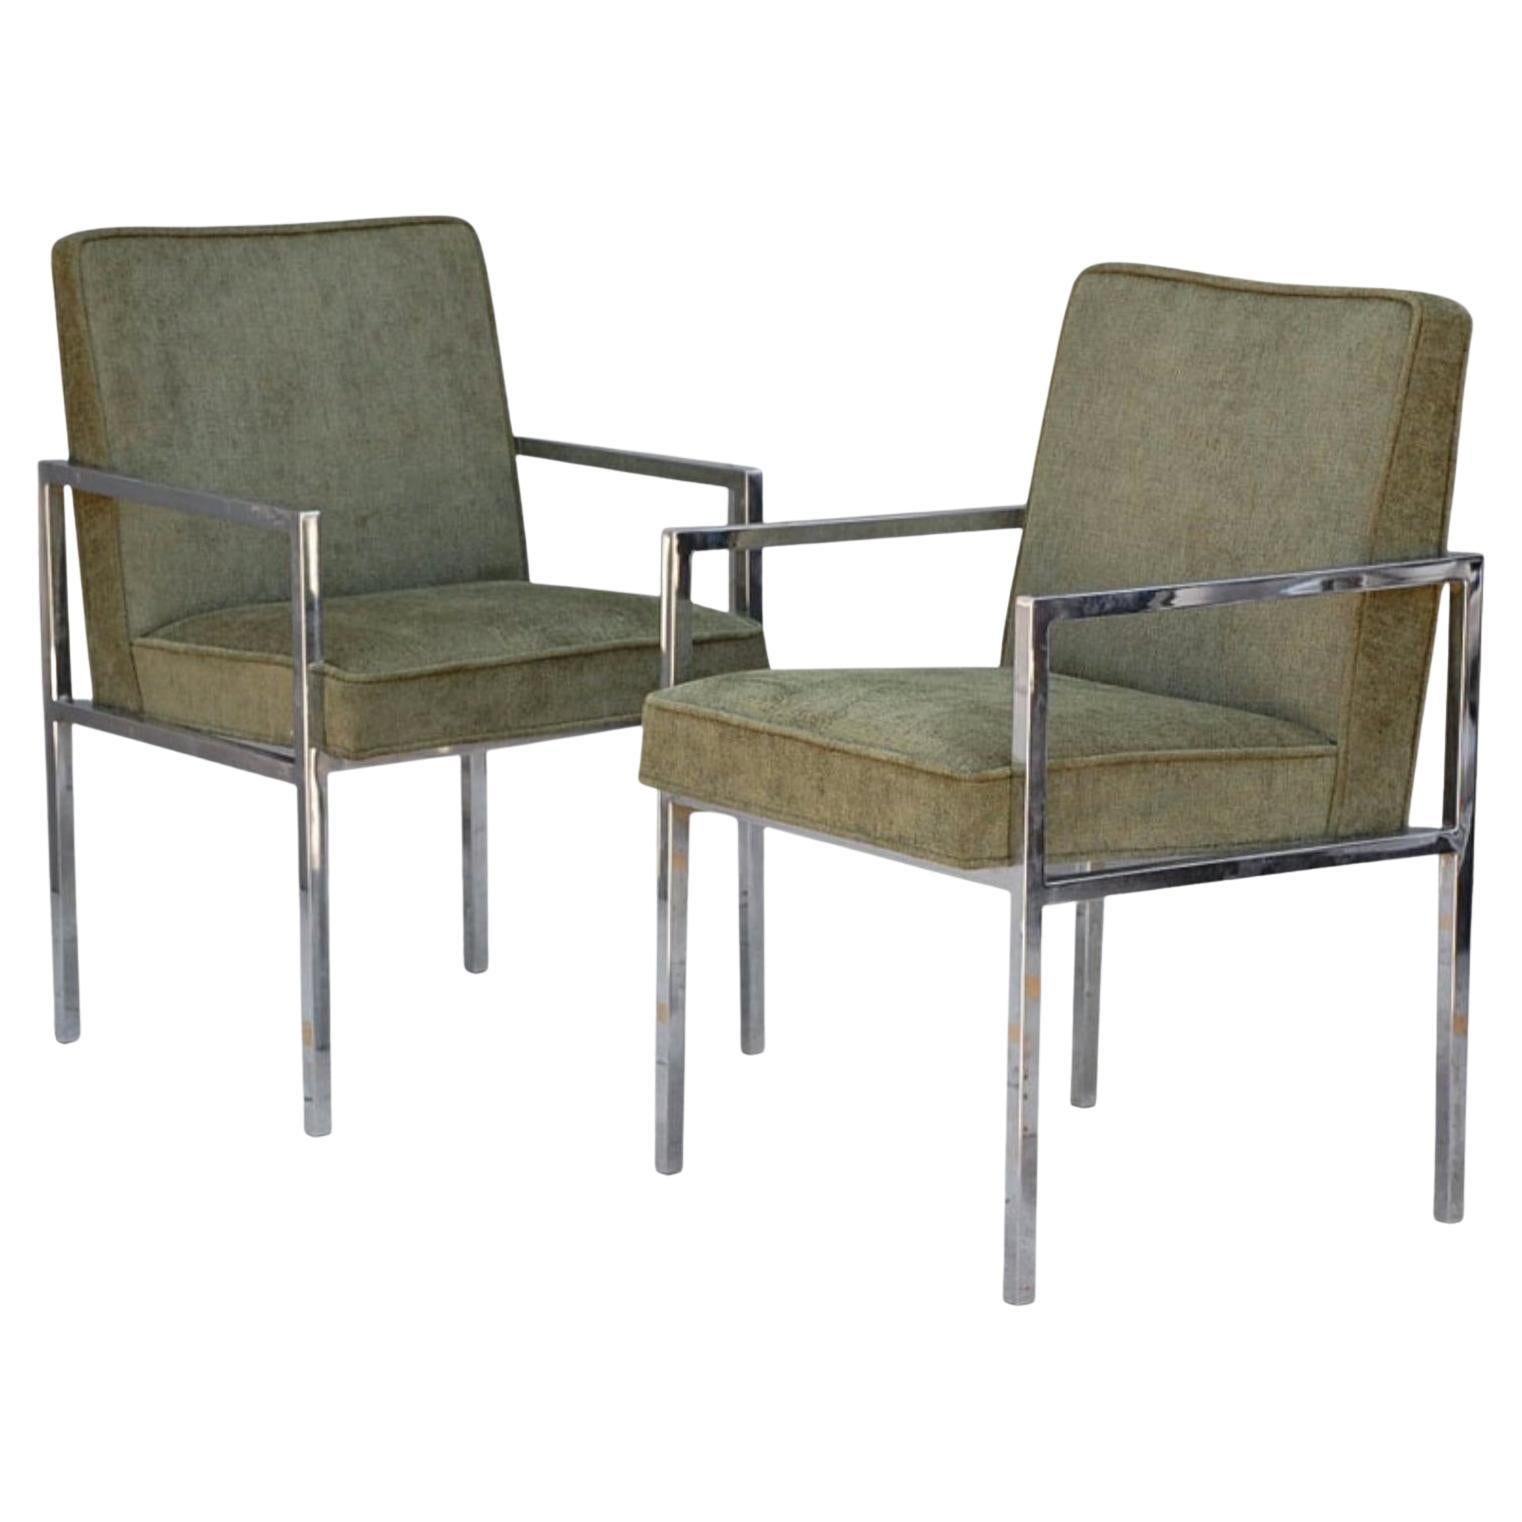 Pair of Chic Chromed Steel Upholstered Armchairs